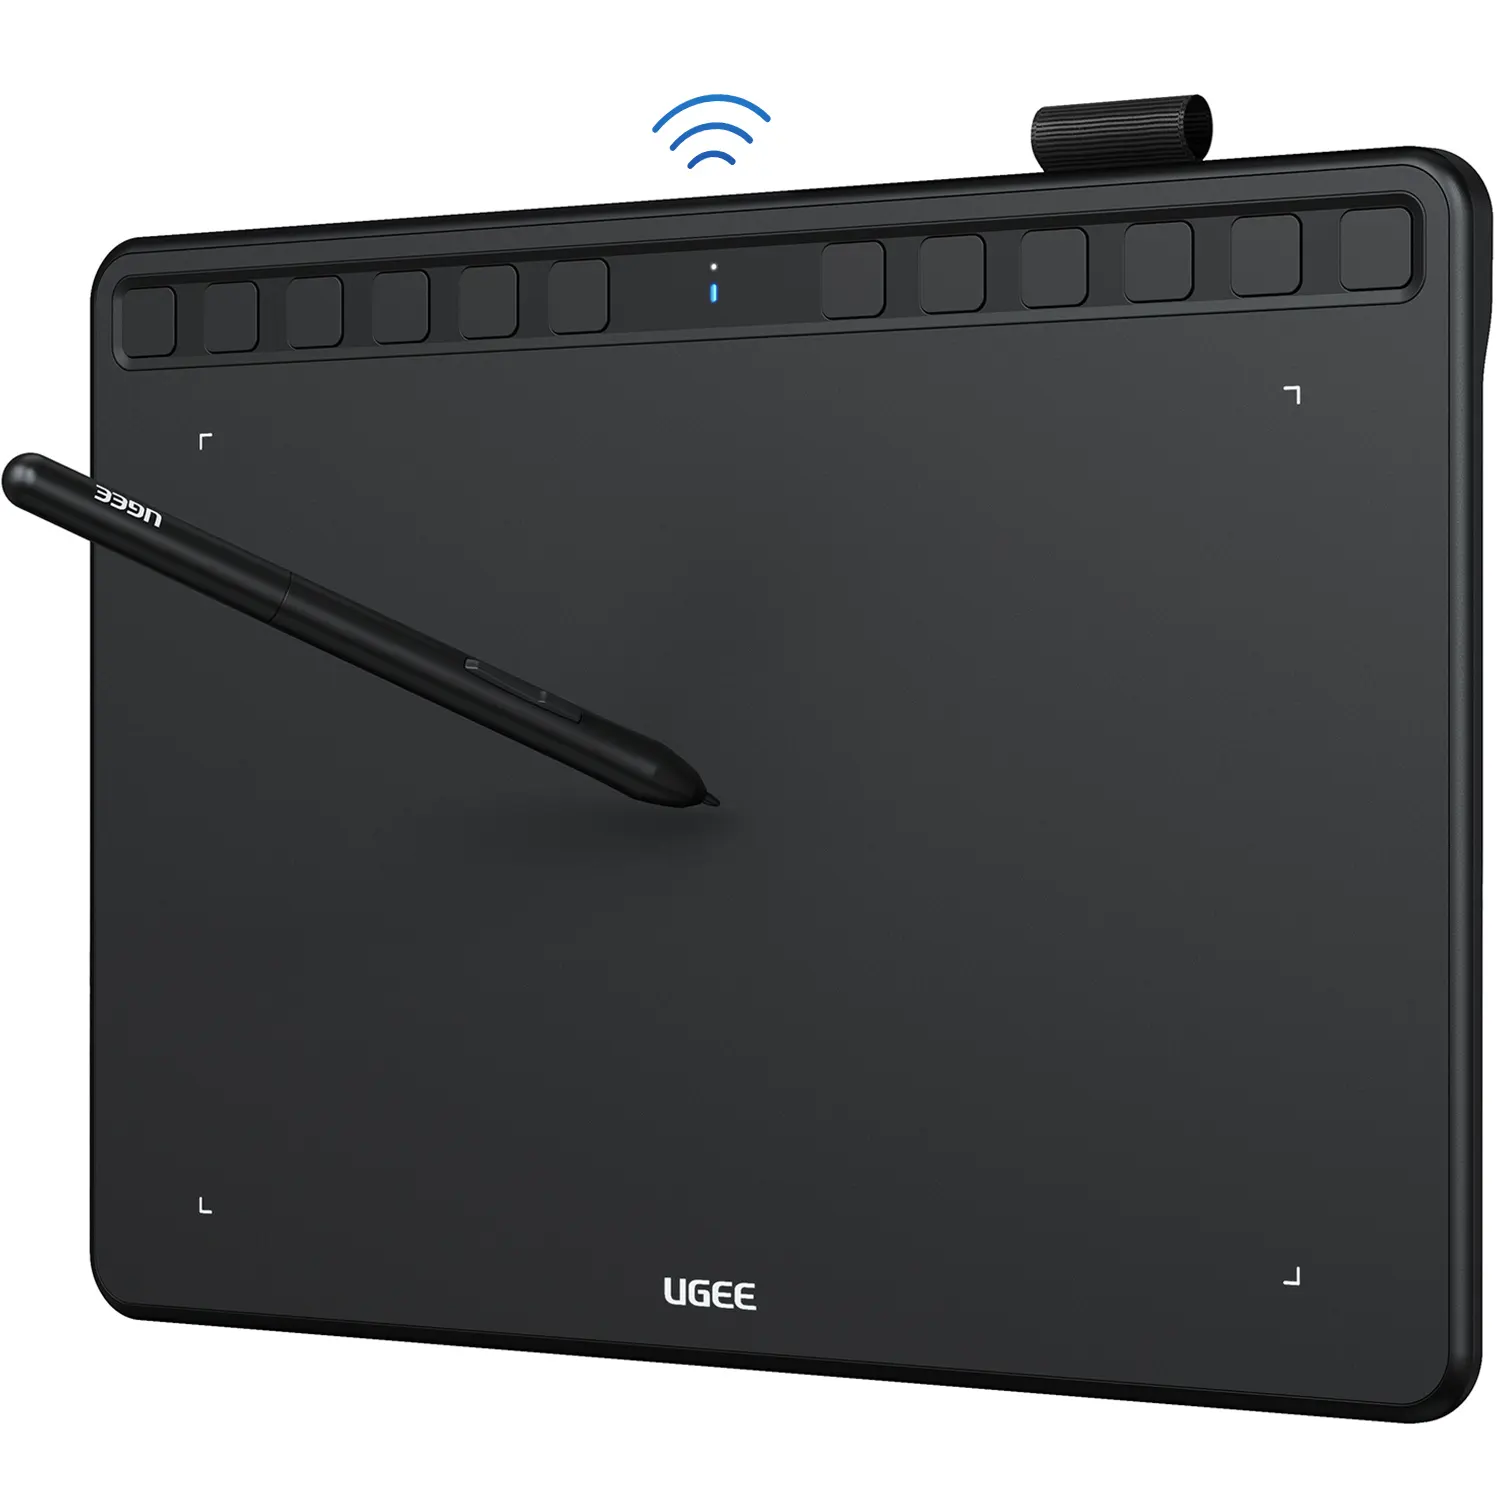 RTS ugee S1060W Wireless 10x6.27inch Battery-fre Stylus support Windows Mac Android Chrome Graphic Tablet Drawing Tablet